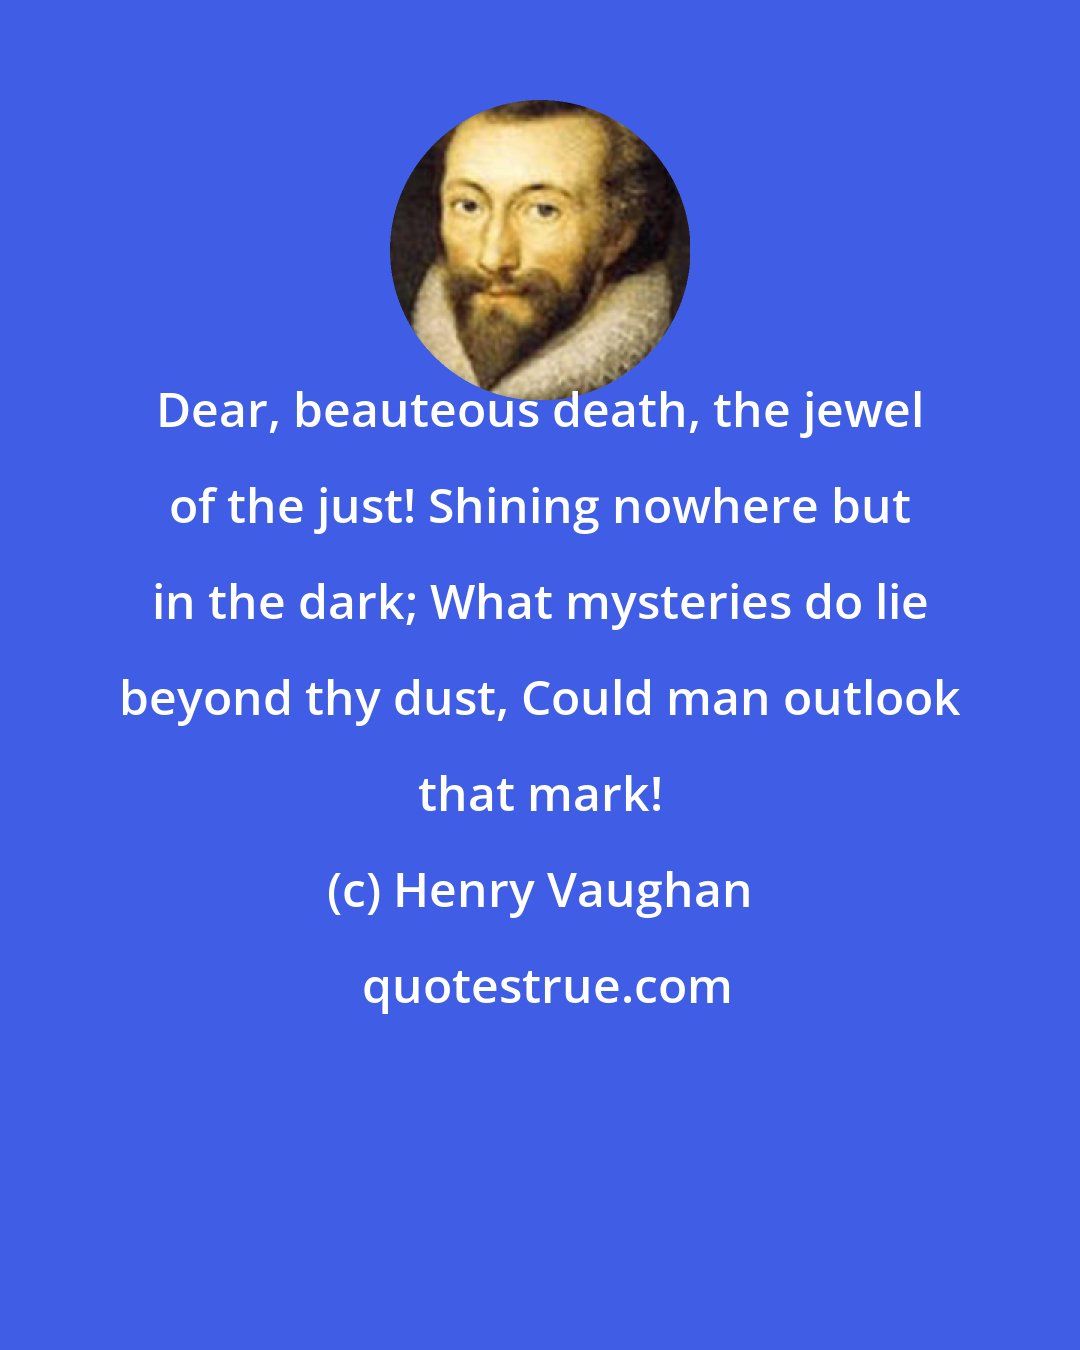 Henry Vaughan: Dear, beauteous death, the jewel of the just! Shining nowhere but in the dark; What mysteries do lie beyond thy dust, Could man outlook that mark!